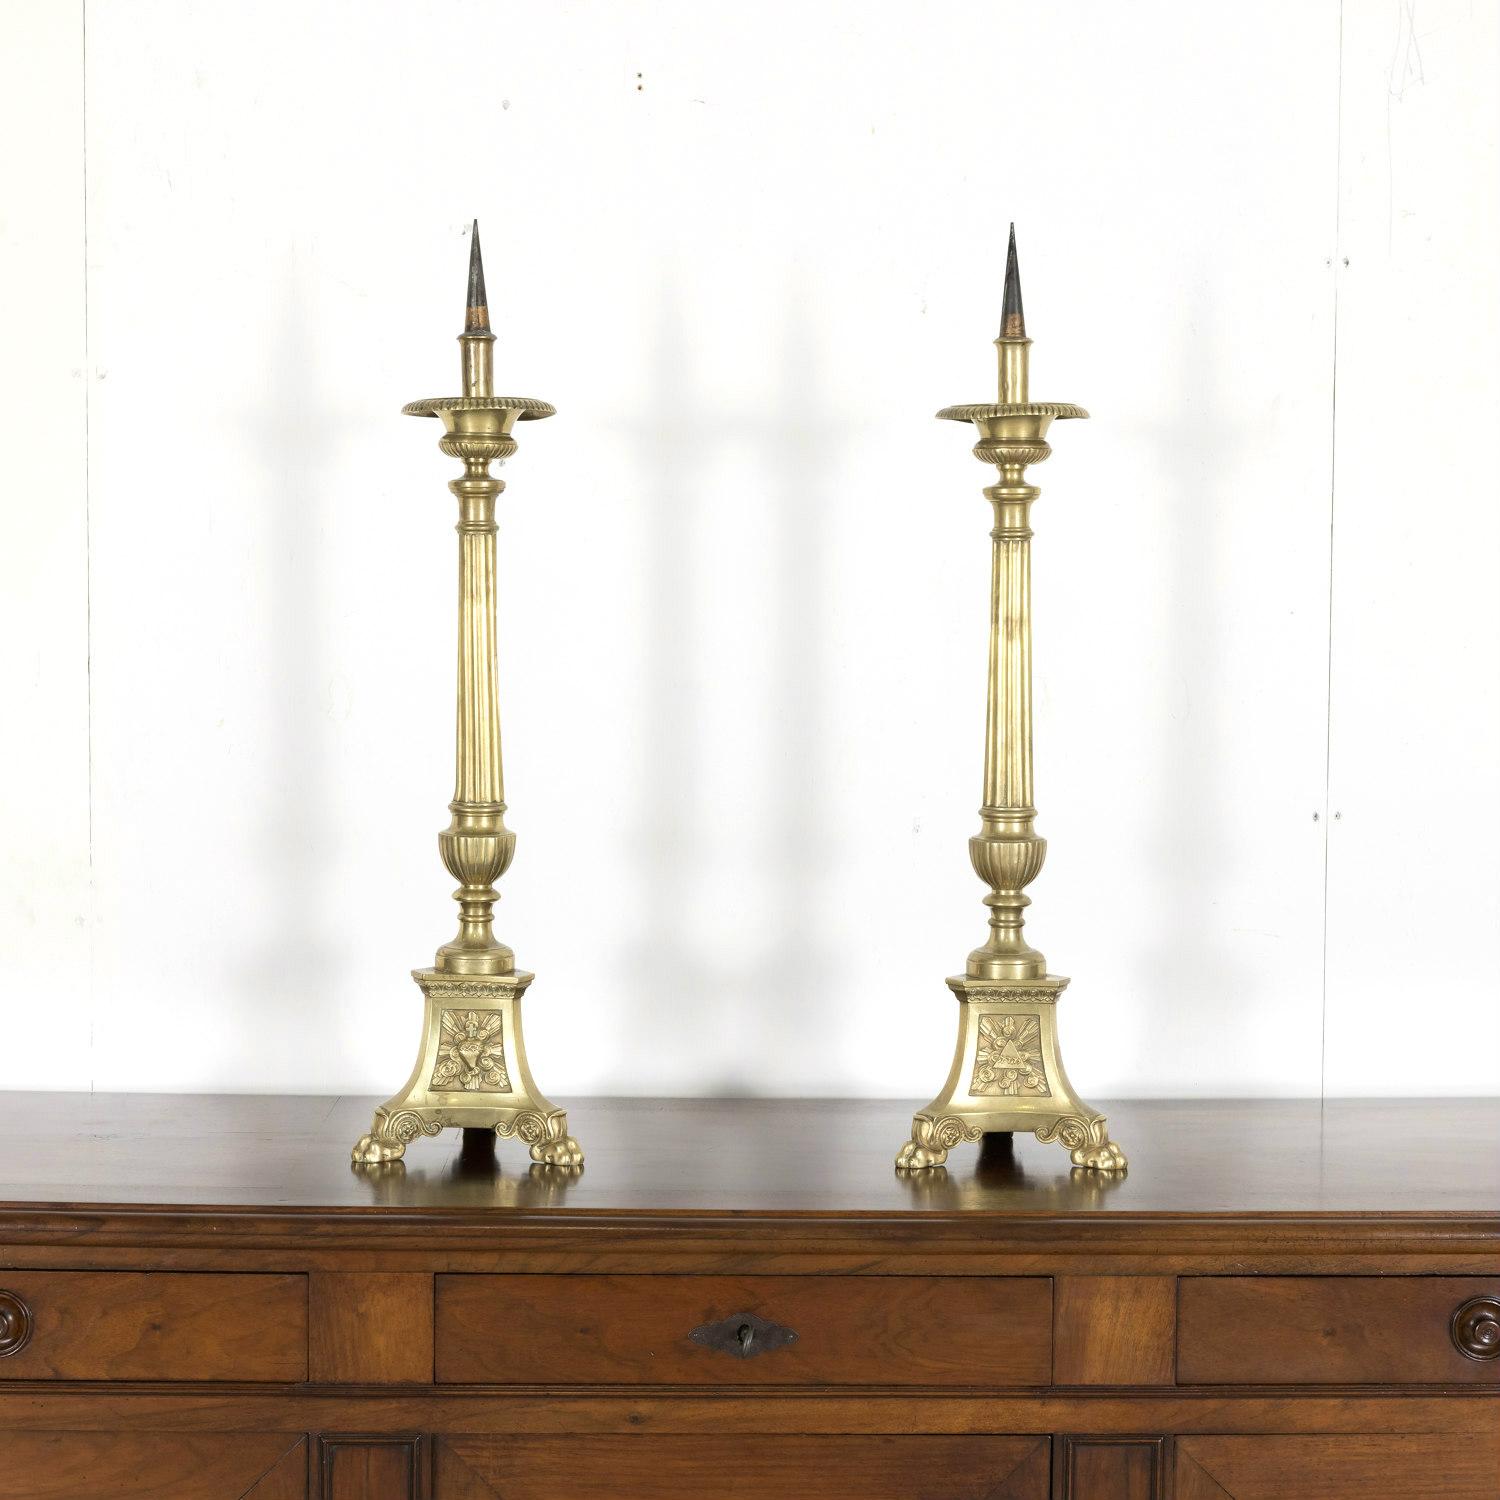 Large Pair of 19th Century French Solid Brass Altar Prickets or Candlesticks In Good Condition For Sale In Birmingham, AL